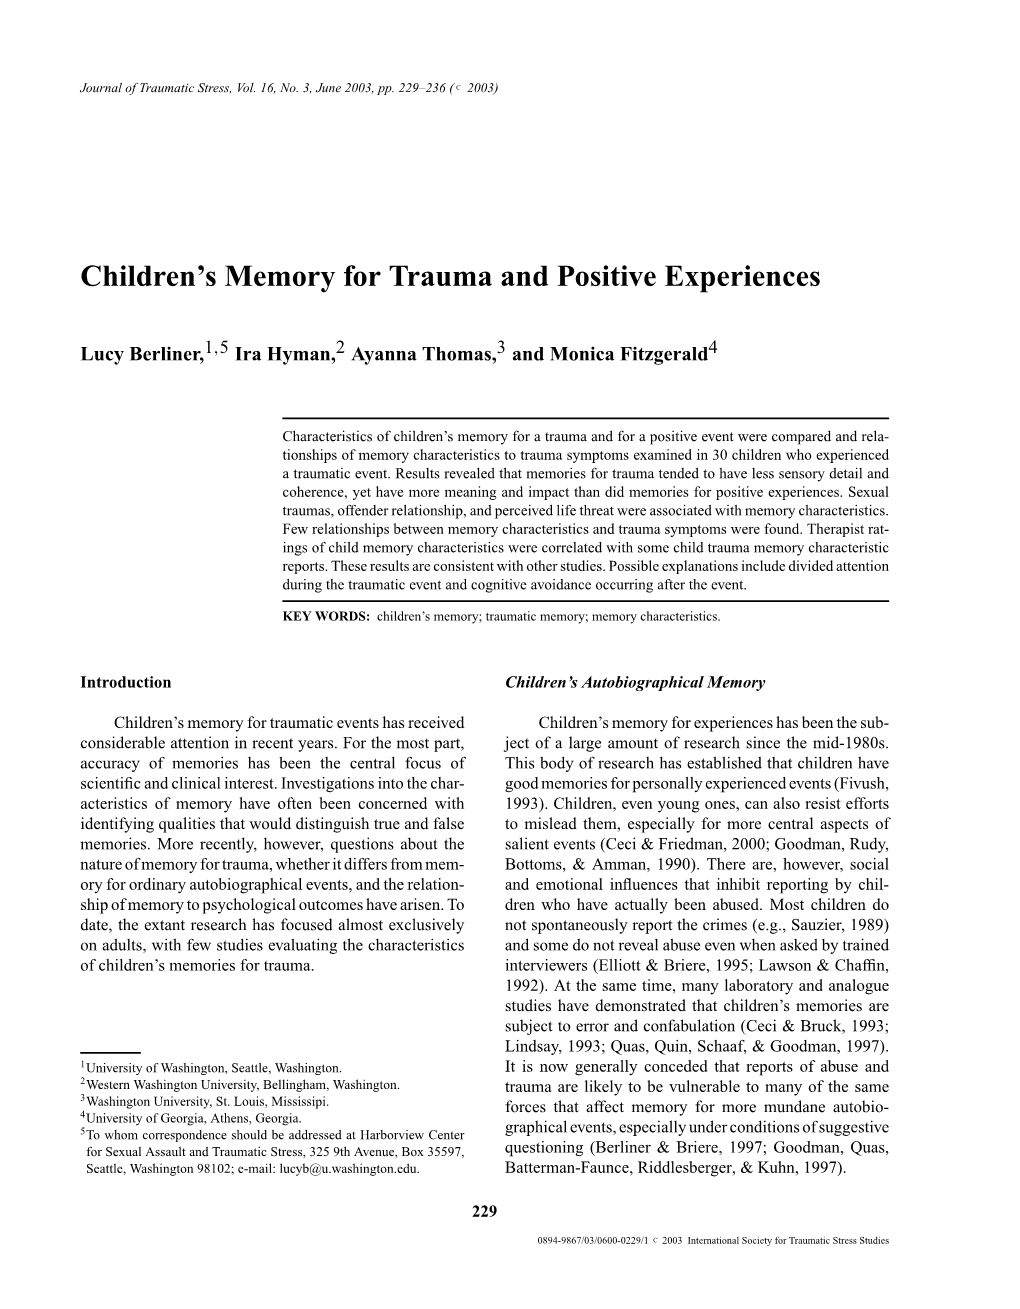 Children's Memory for Trauma and Positive Experiences